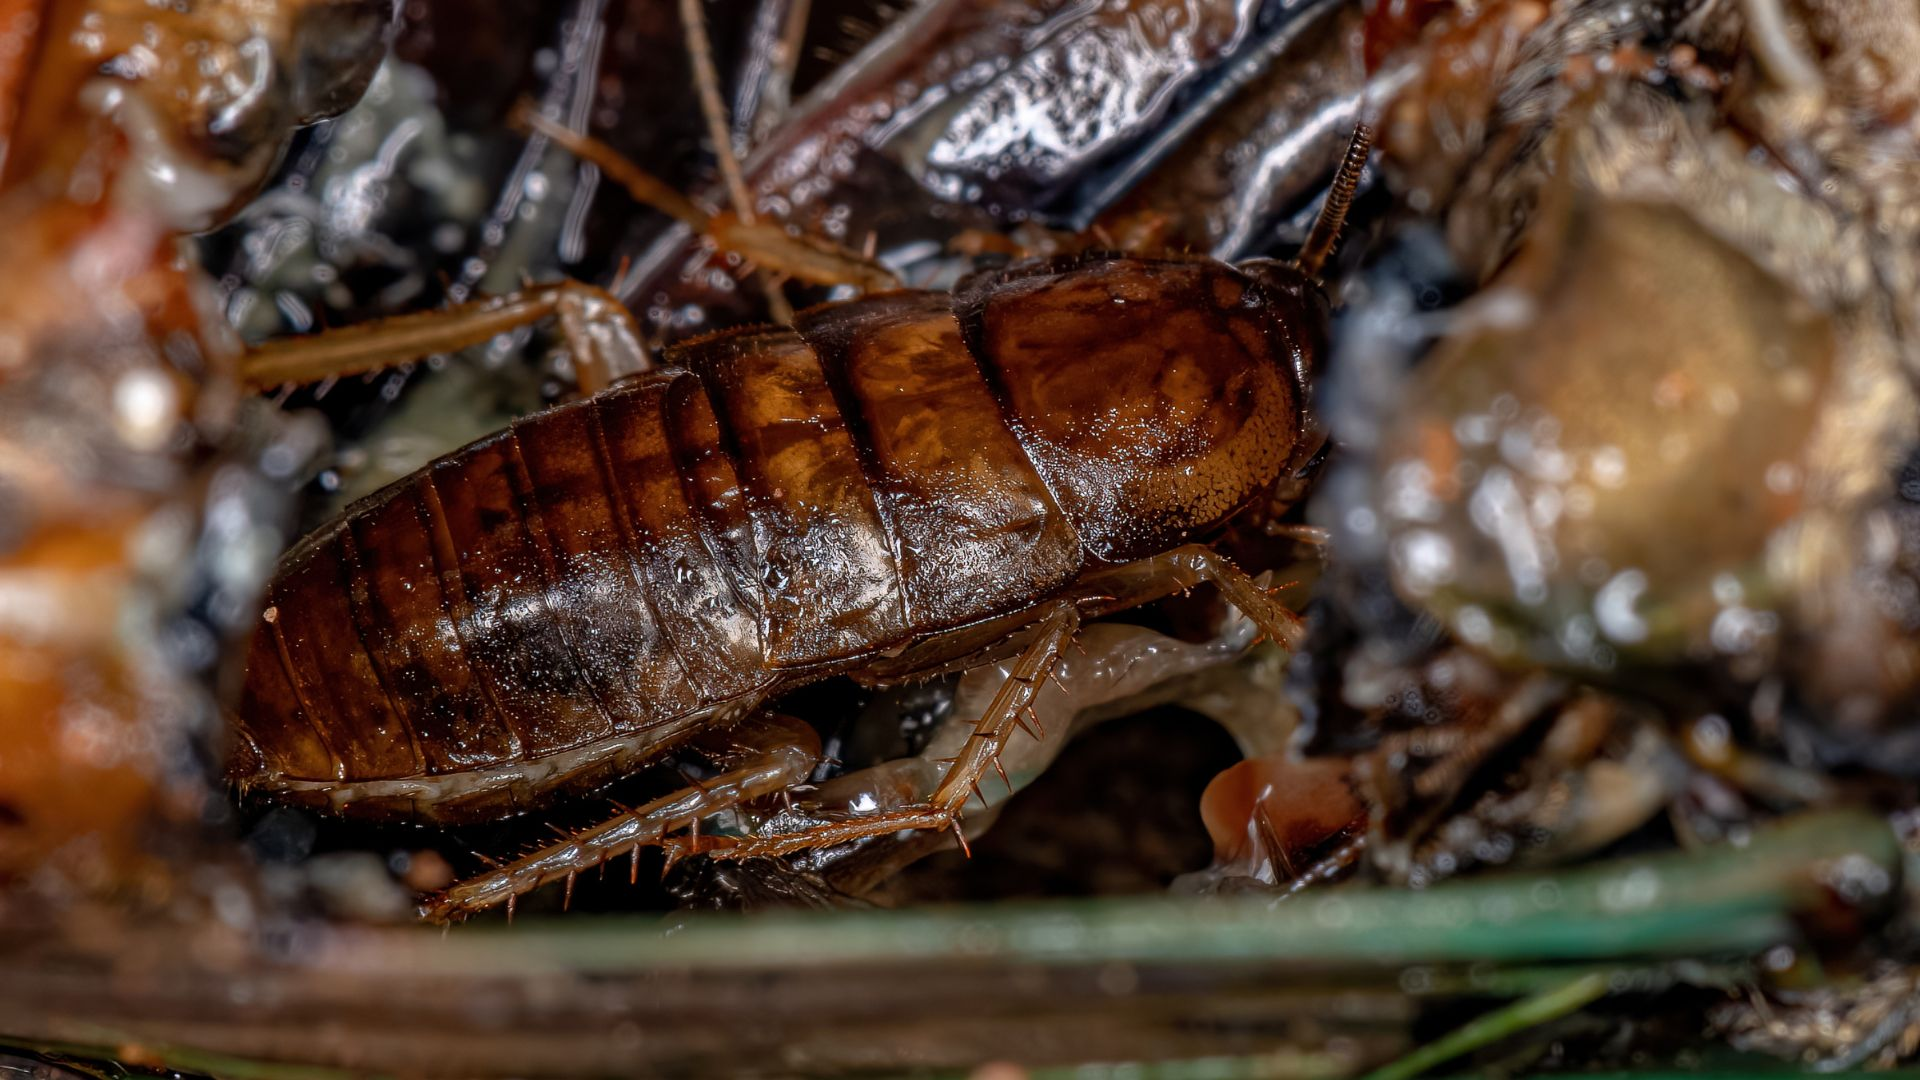 An image of a wood cockroach nymph feeding on organic material.